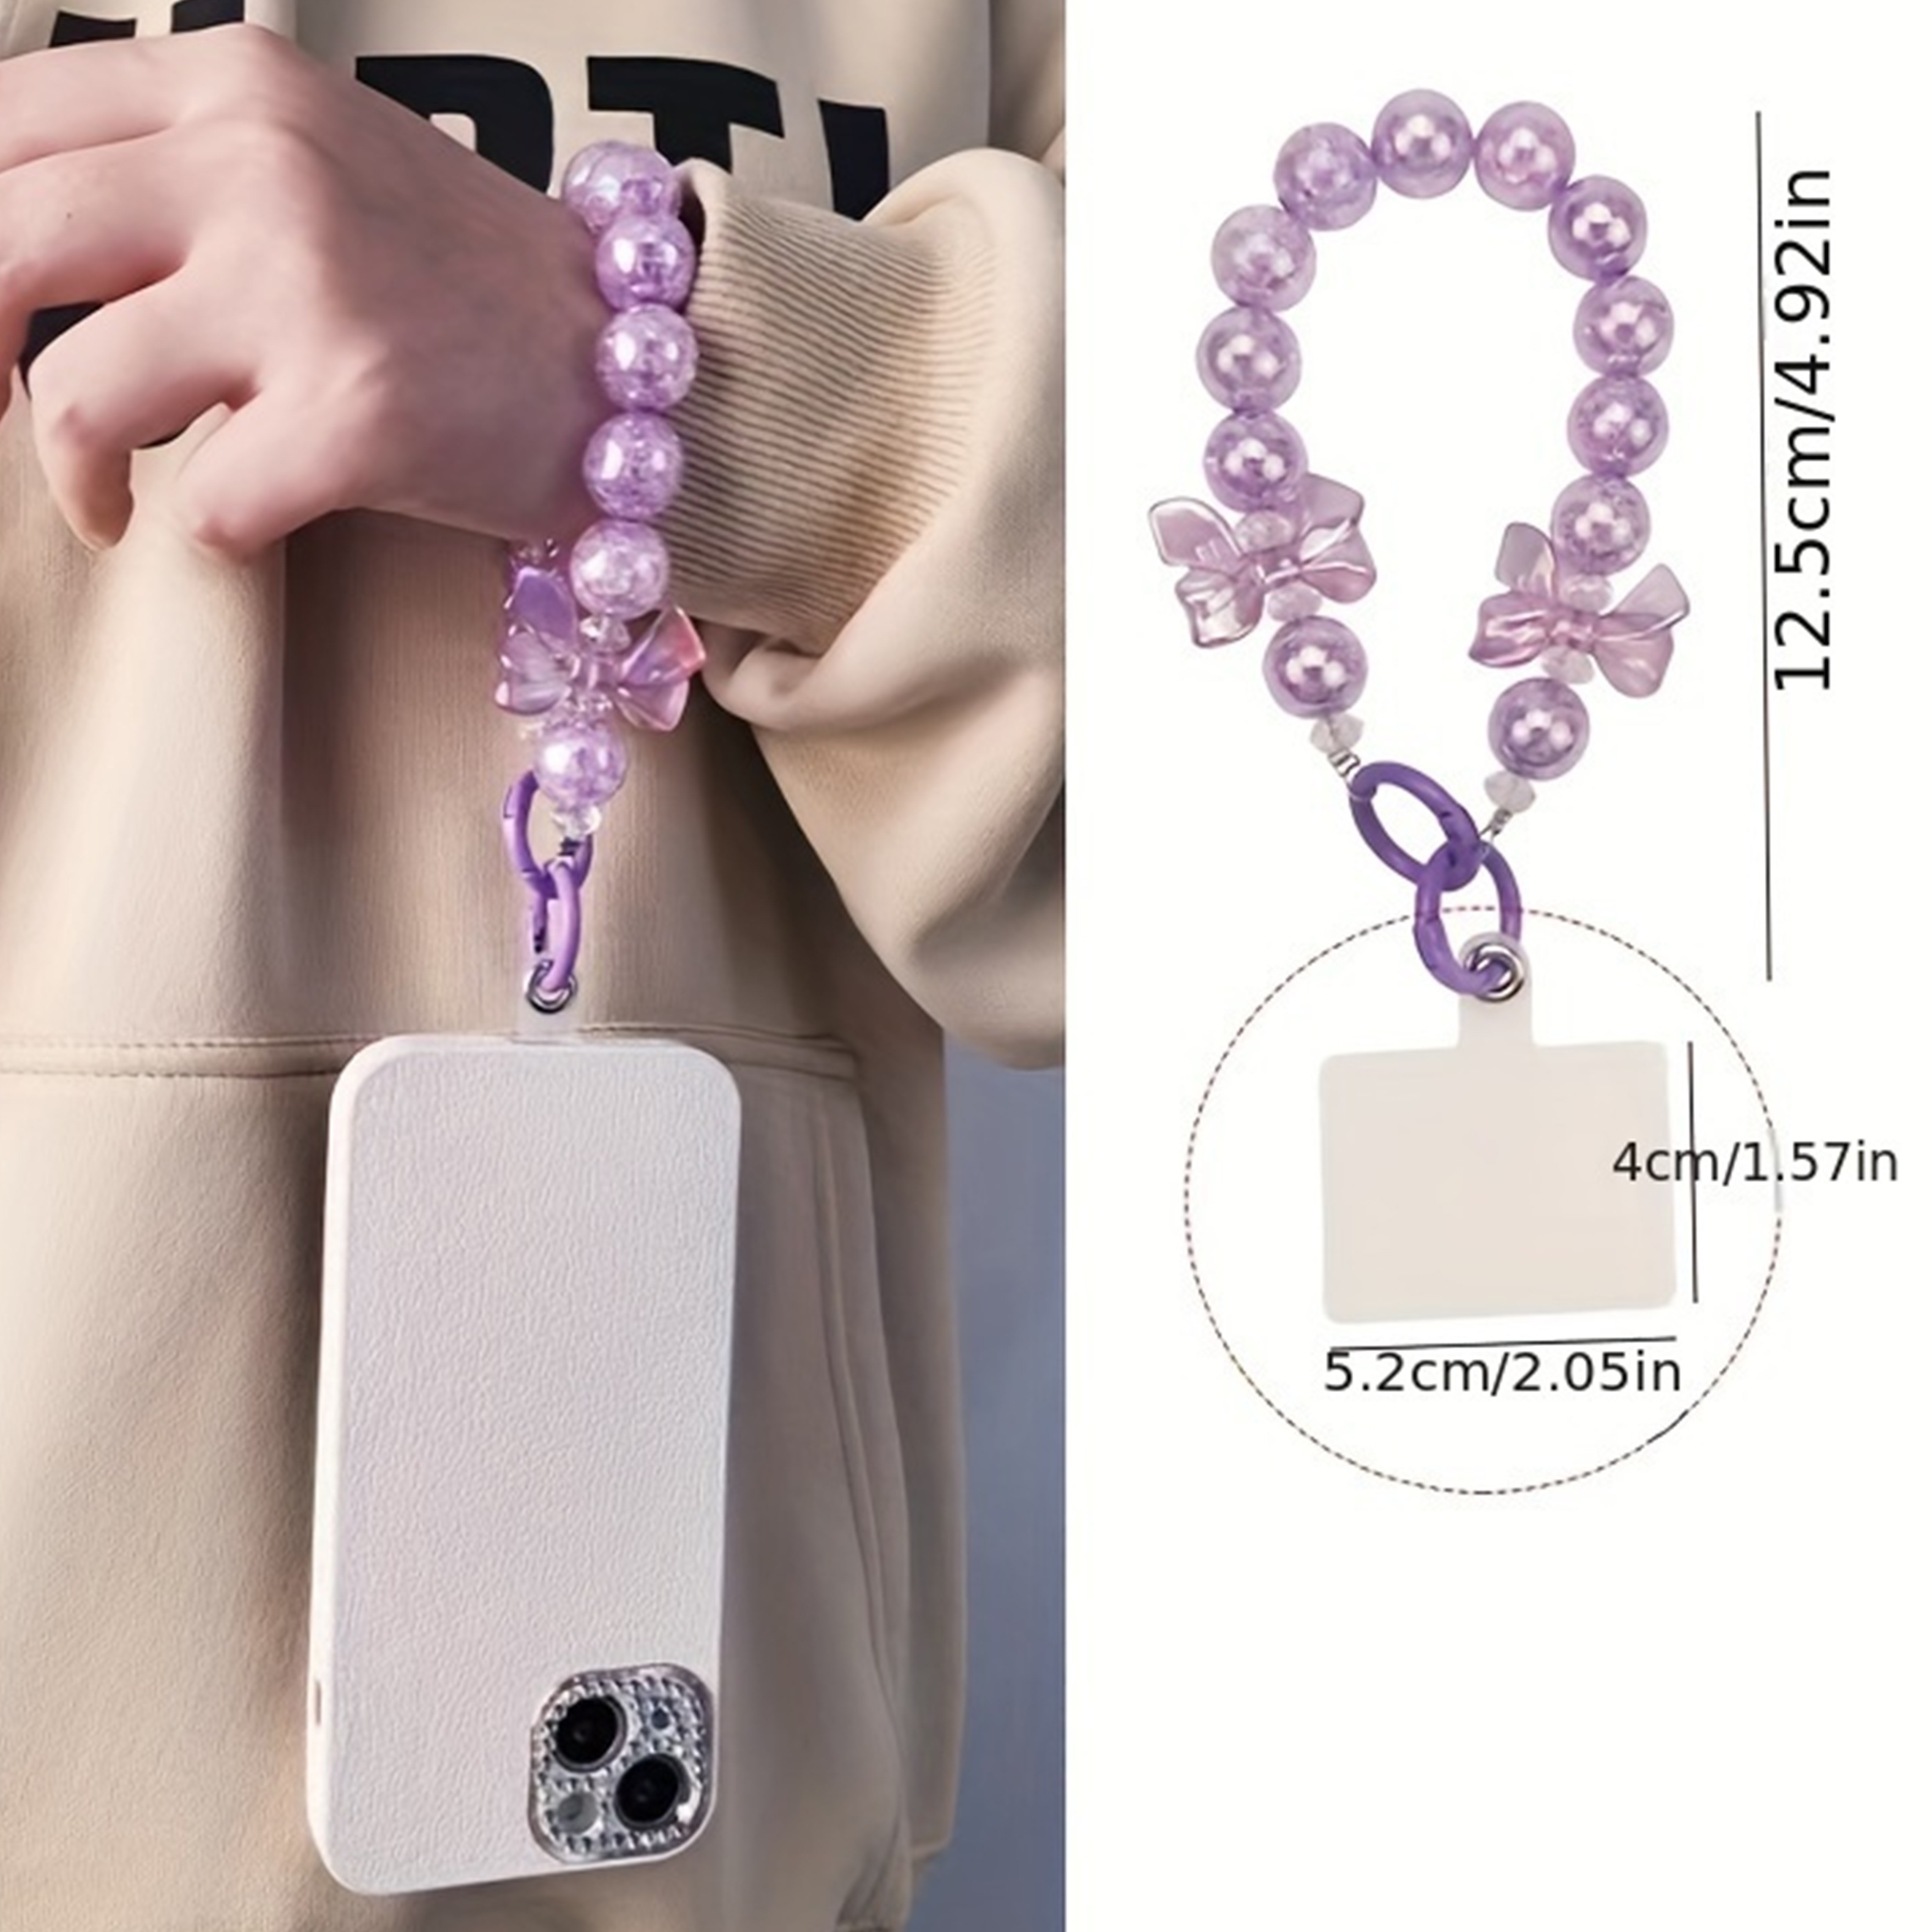 Phone Strap with Beaded Marble - Detachable Phone Lanyard - Hands-Free  Wrist Strap - Adjustable Phone Charm Grip for Women - iPhone 14 Pro Max/ 13  Pro Max/ 12 Pro Max/ 11 - White Marble 